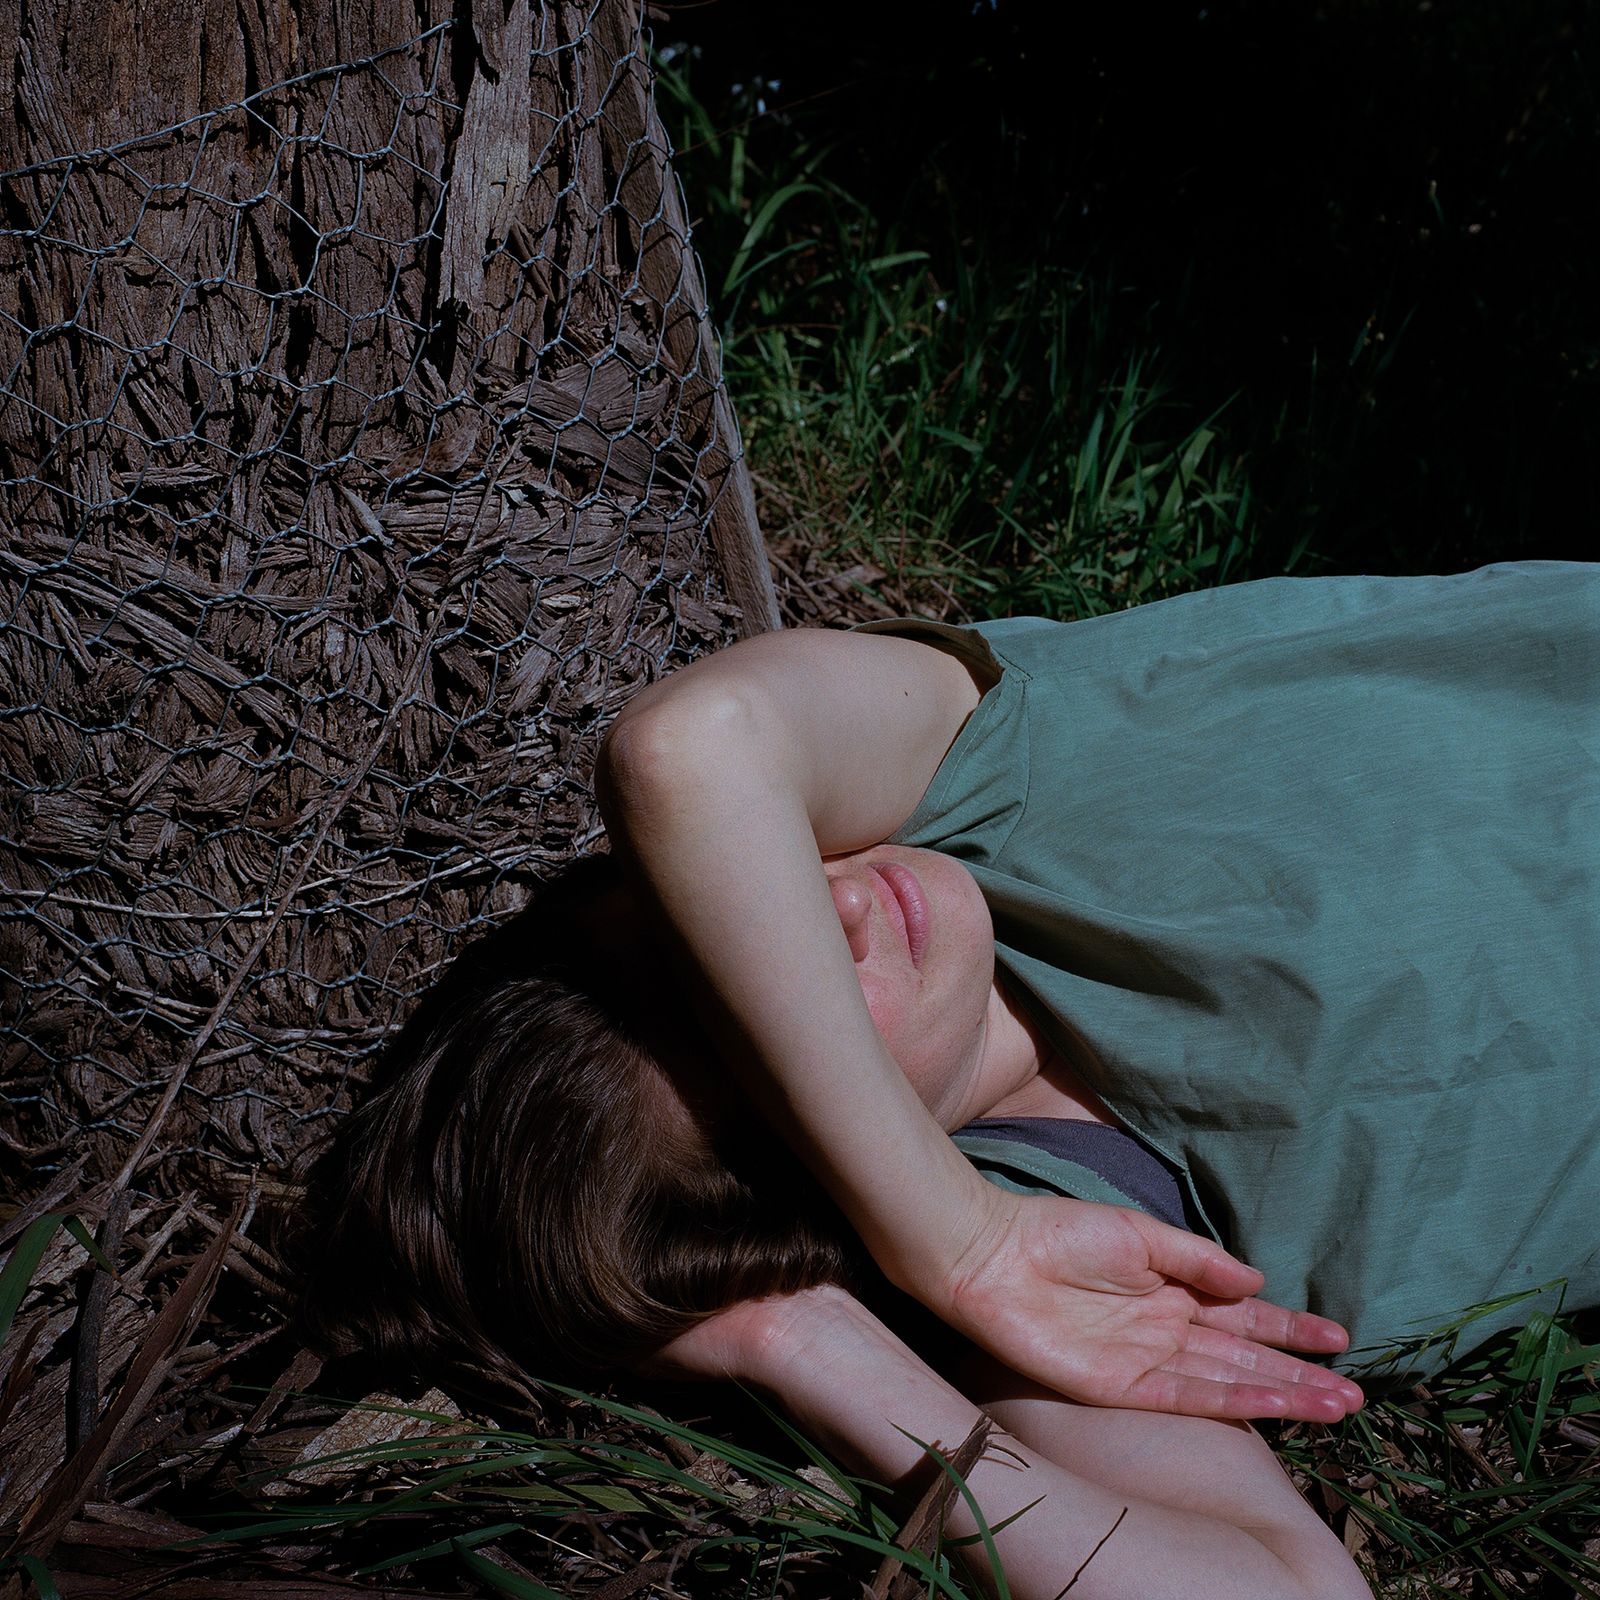 © Erin Lee - Image from the The Crimson Thread photography project